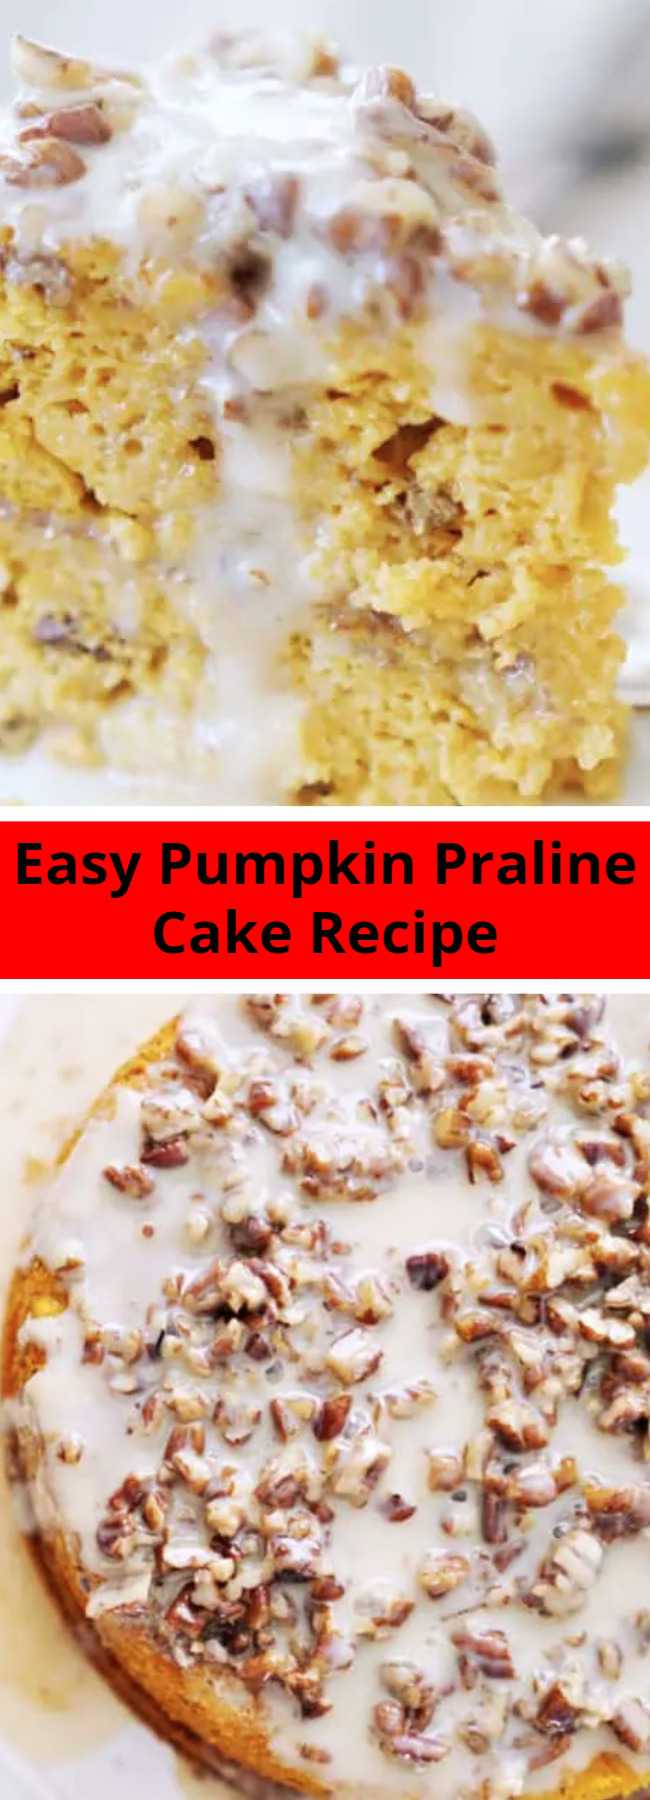 Easy Pumpkin Praline Cake Recipe - The most indulgent icing on the planet poured over a heavenly, moist, decadent and flavor packed Pumpkin Praline Cake. The EASIEST pumpkin cake recipe EVER!
